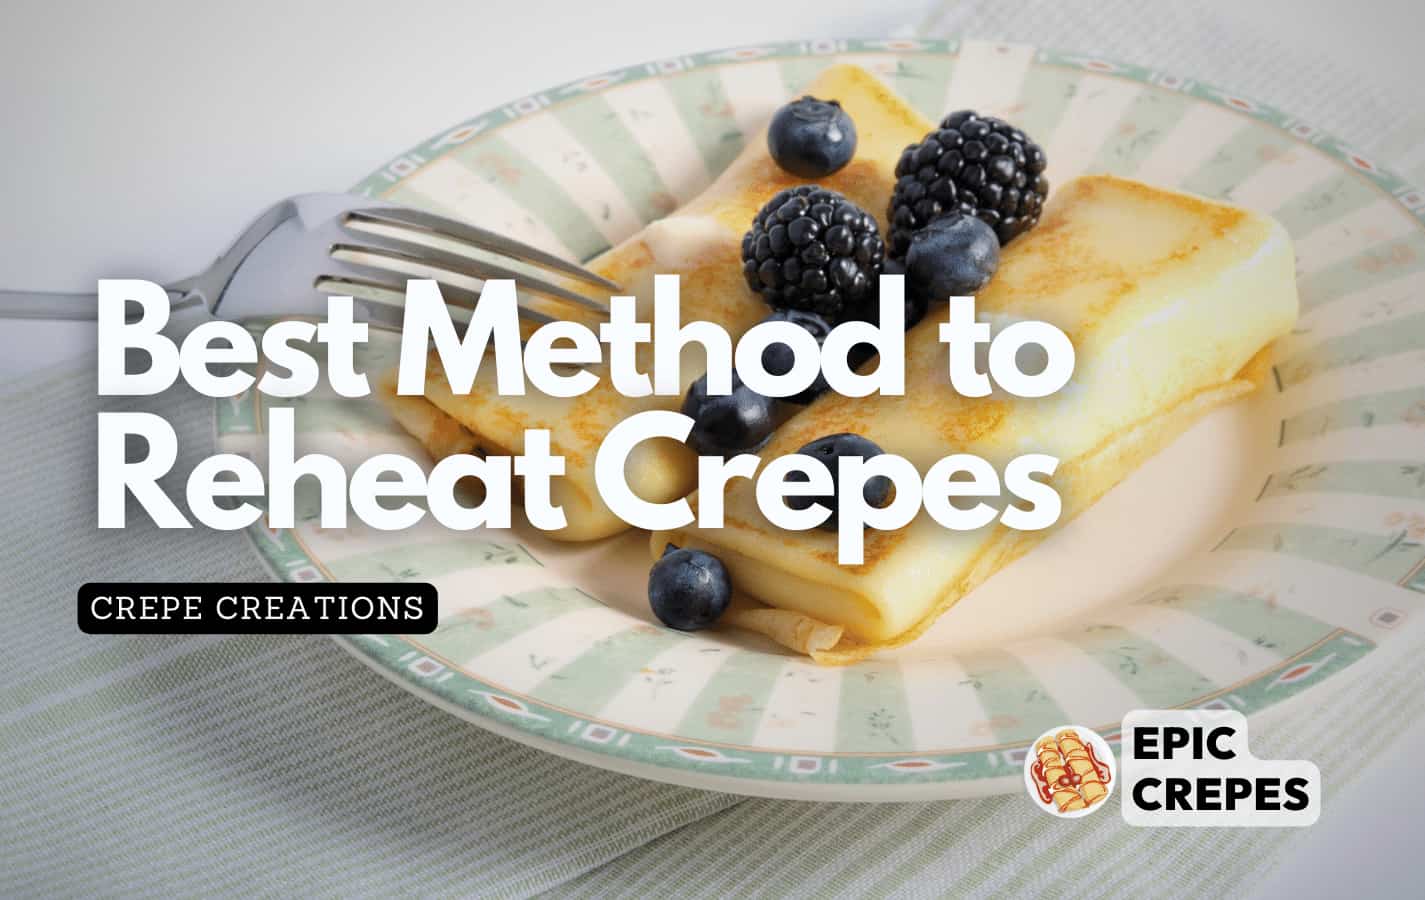 Cream cheese crepes with blackberries